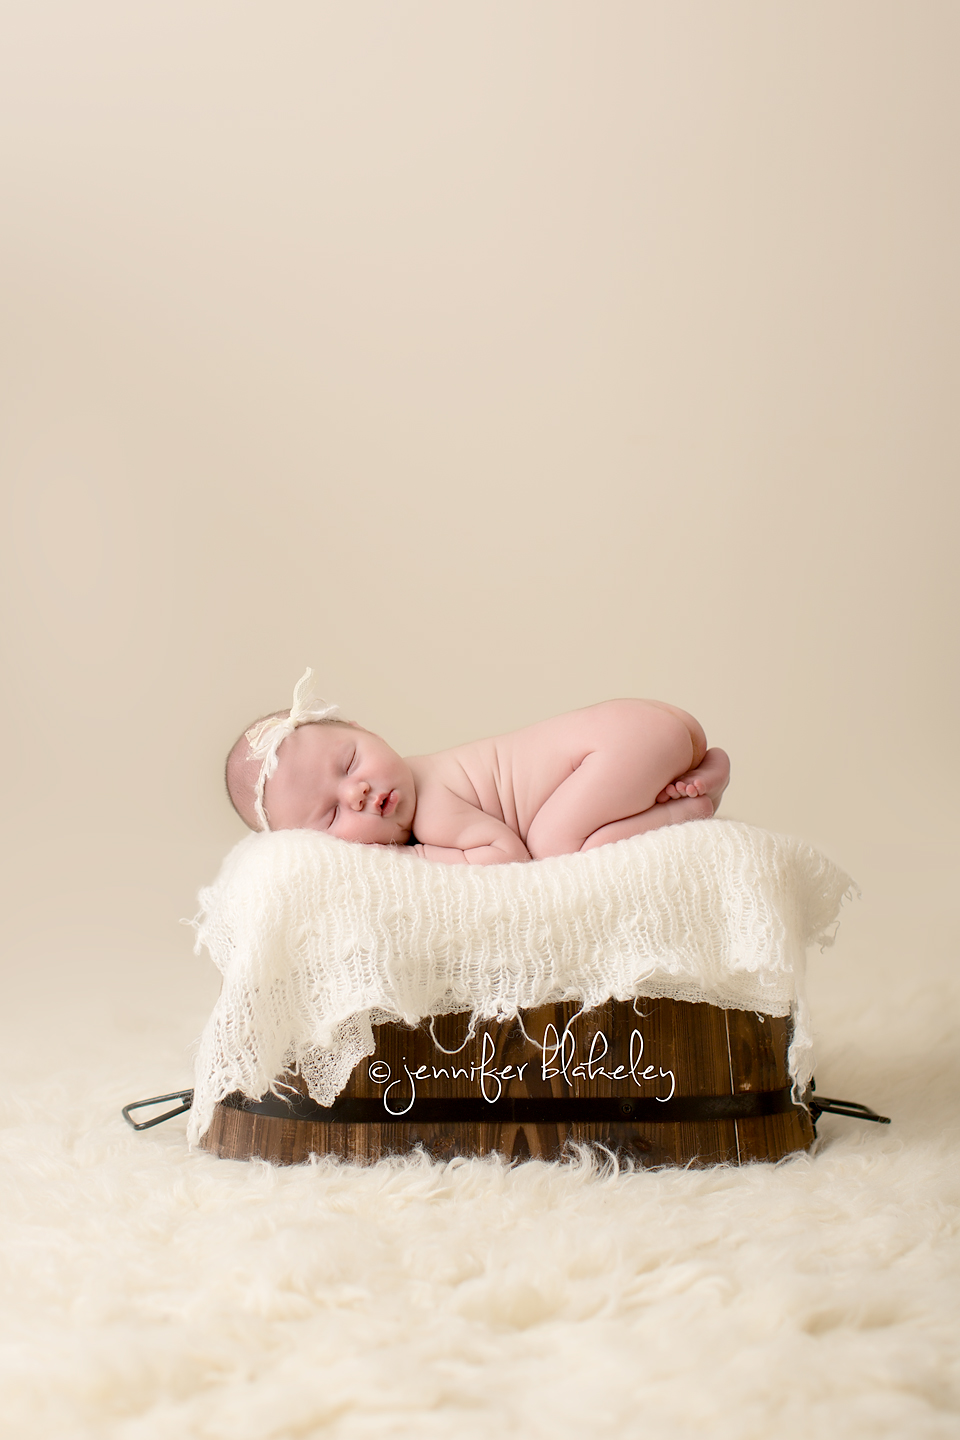 newborn photography community critique photo submitted by Jennifer Blakeley - 8 community members set this photo as a favourite image.